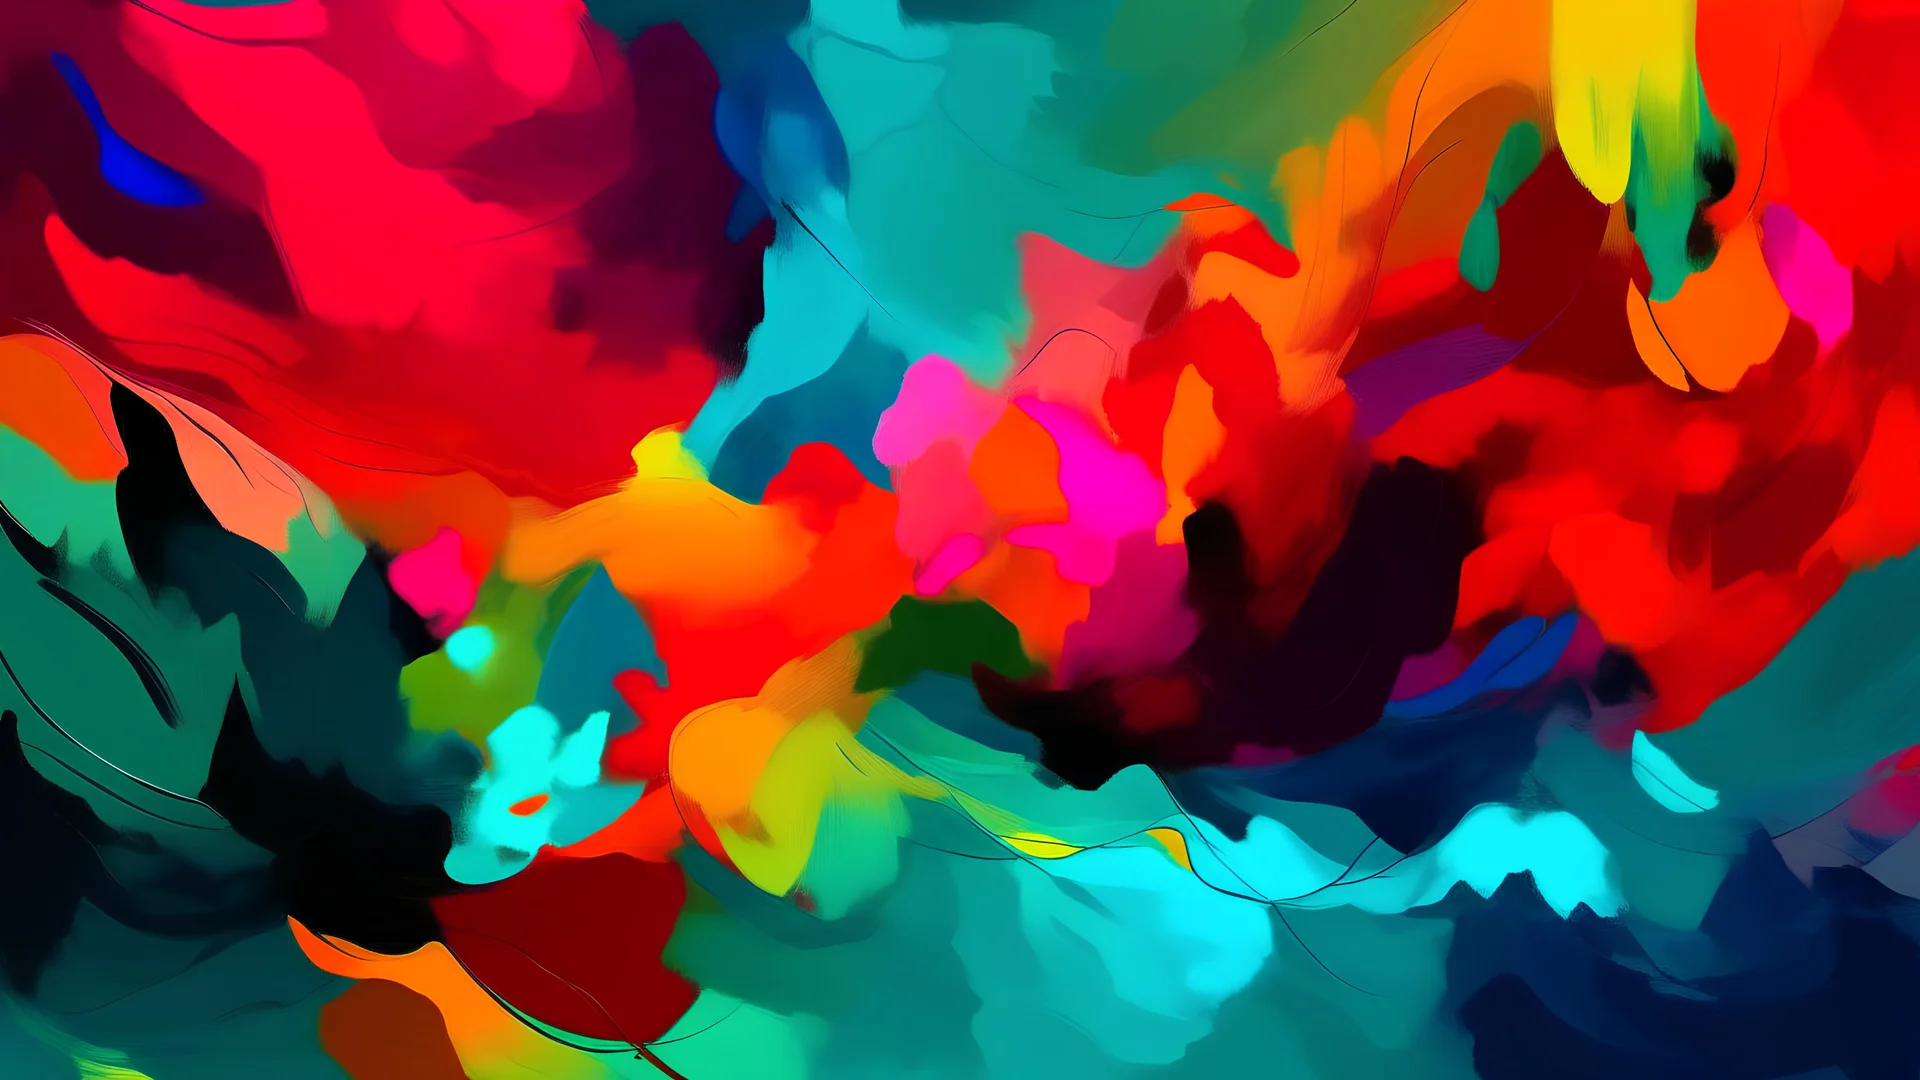 abstract art of various shades of different colors